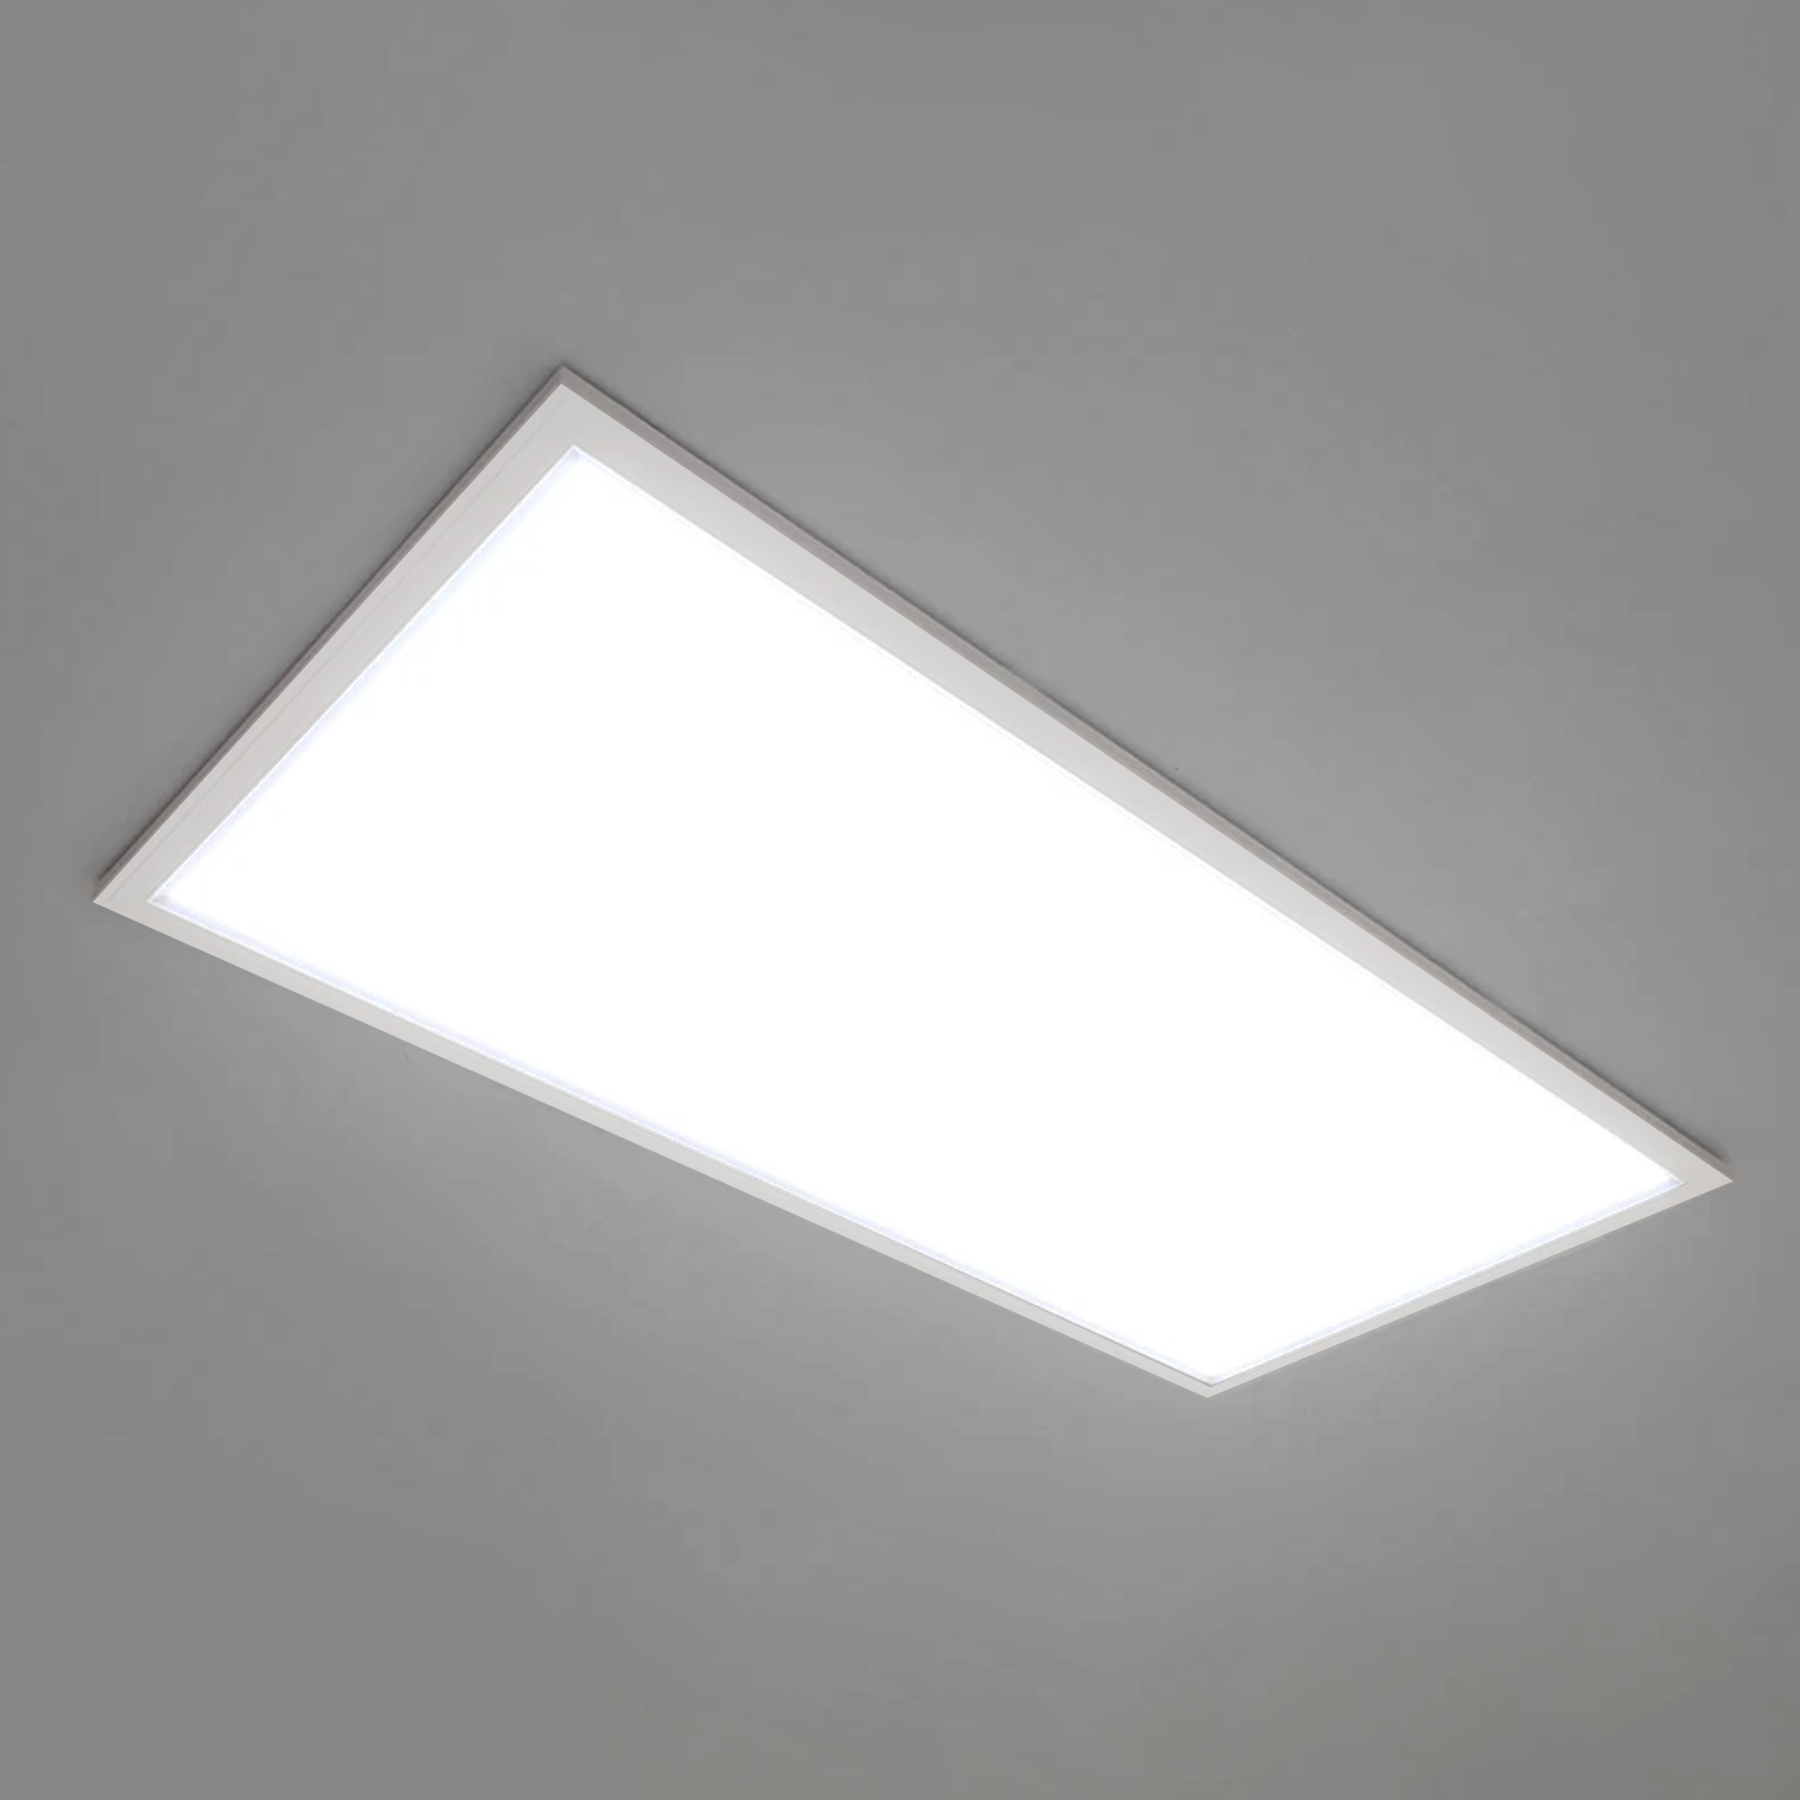 2 Ft X 4 Led Panel Light 4000k Neutral White 72w 9000lm Dimmable Ledmyplace